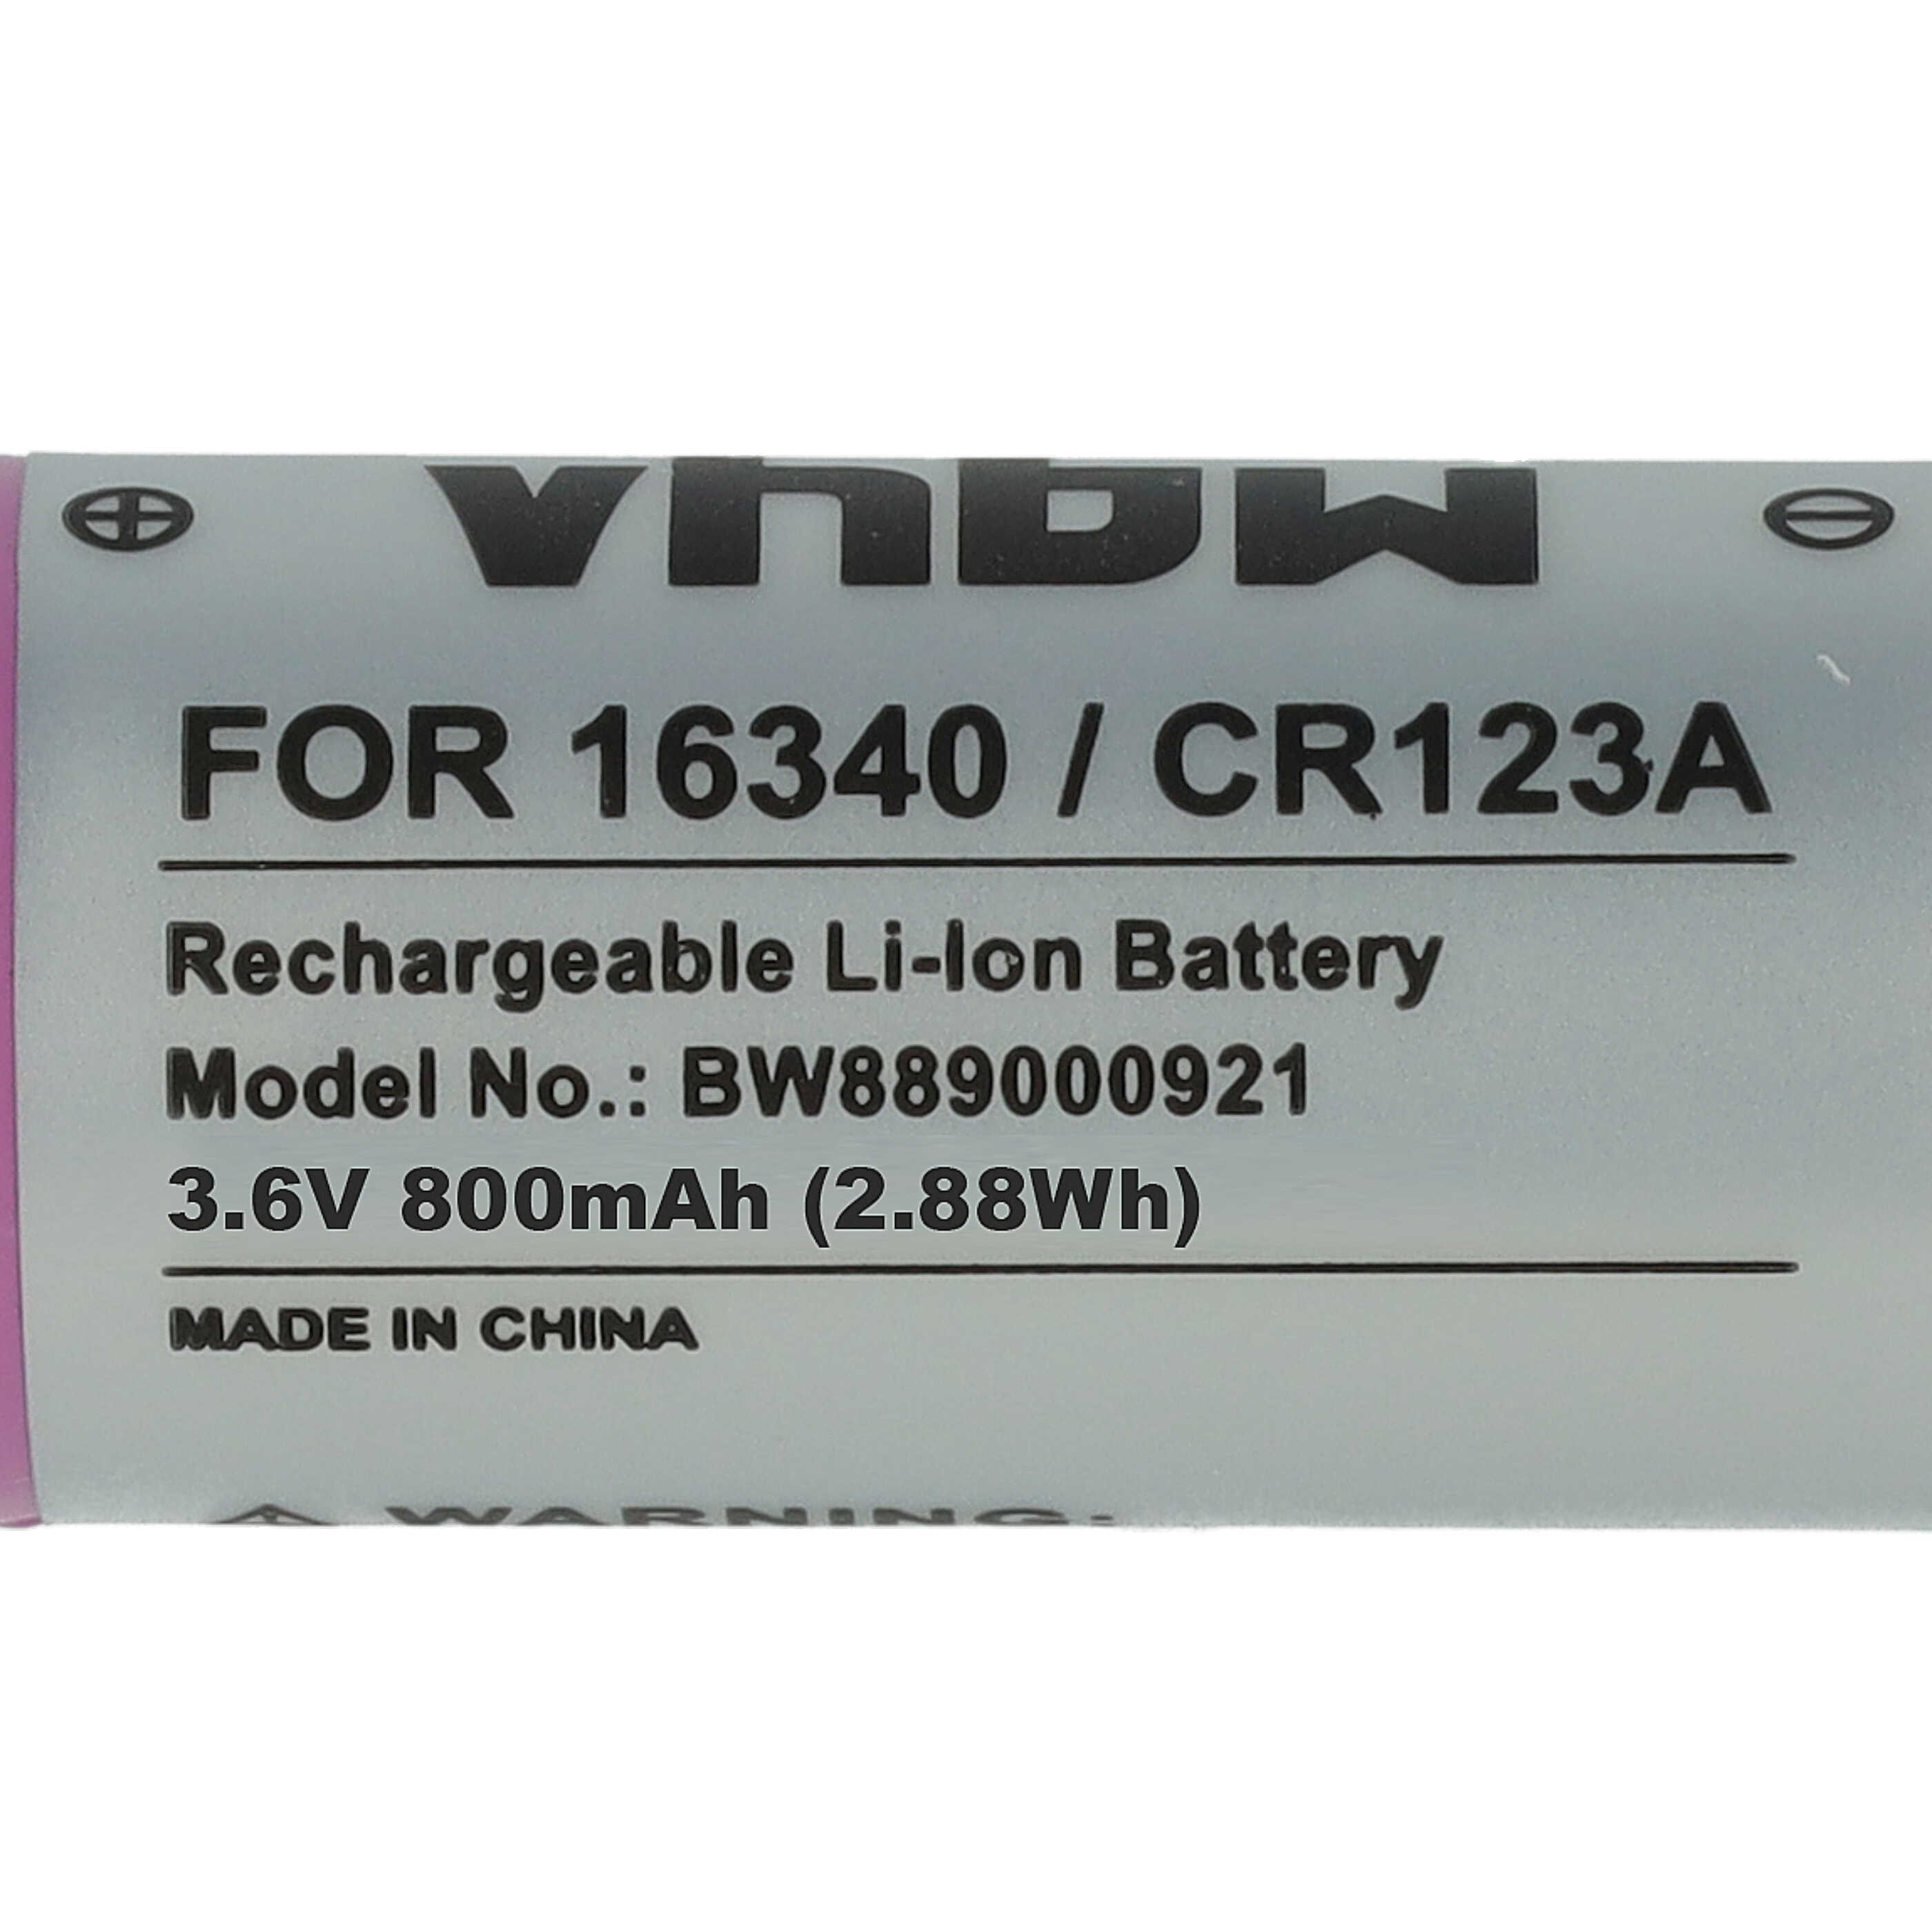 Universal Battery (5 Units) Replacement for 16340, CR123R, CR17335, CR17345, CR123A - 800mAh 3.6V Li-Ion